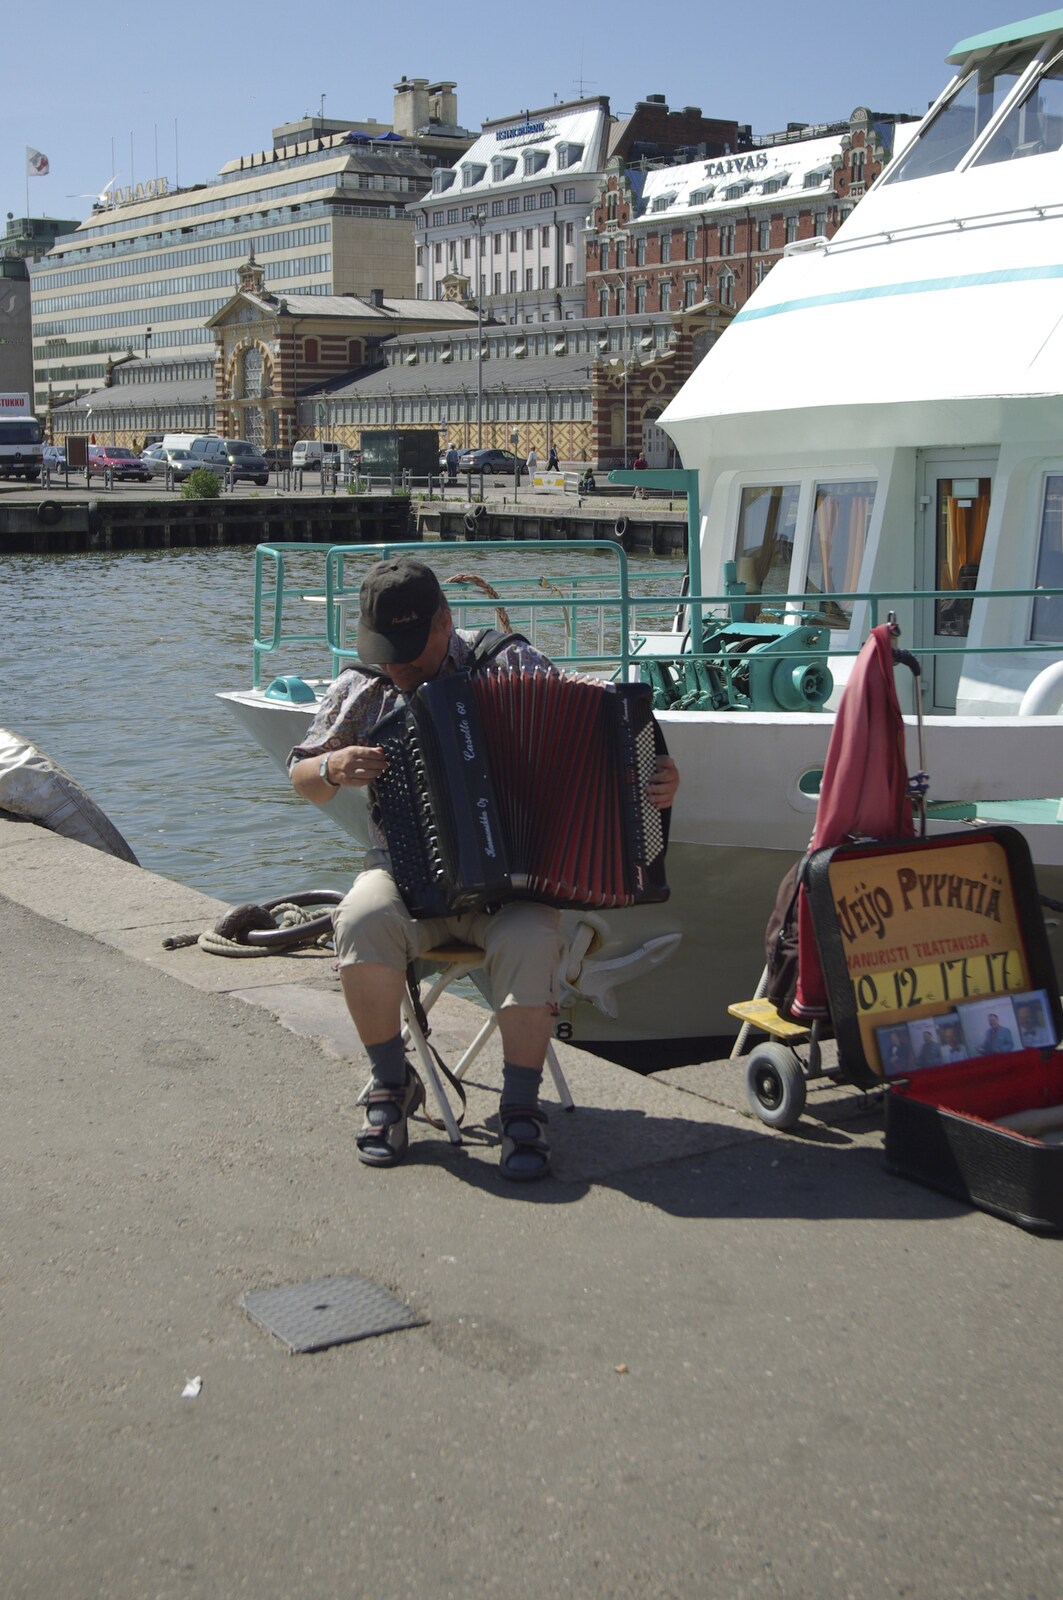 Genesis in Concert, and Suomenlinna, Helsinki, Finland - 11th June 2007: A dude plays accordion near the harbour